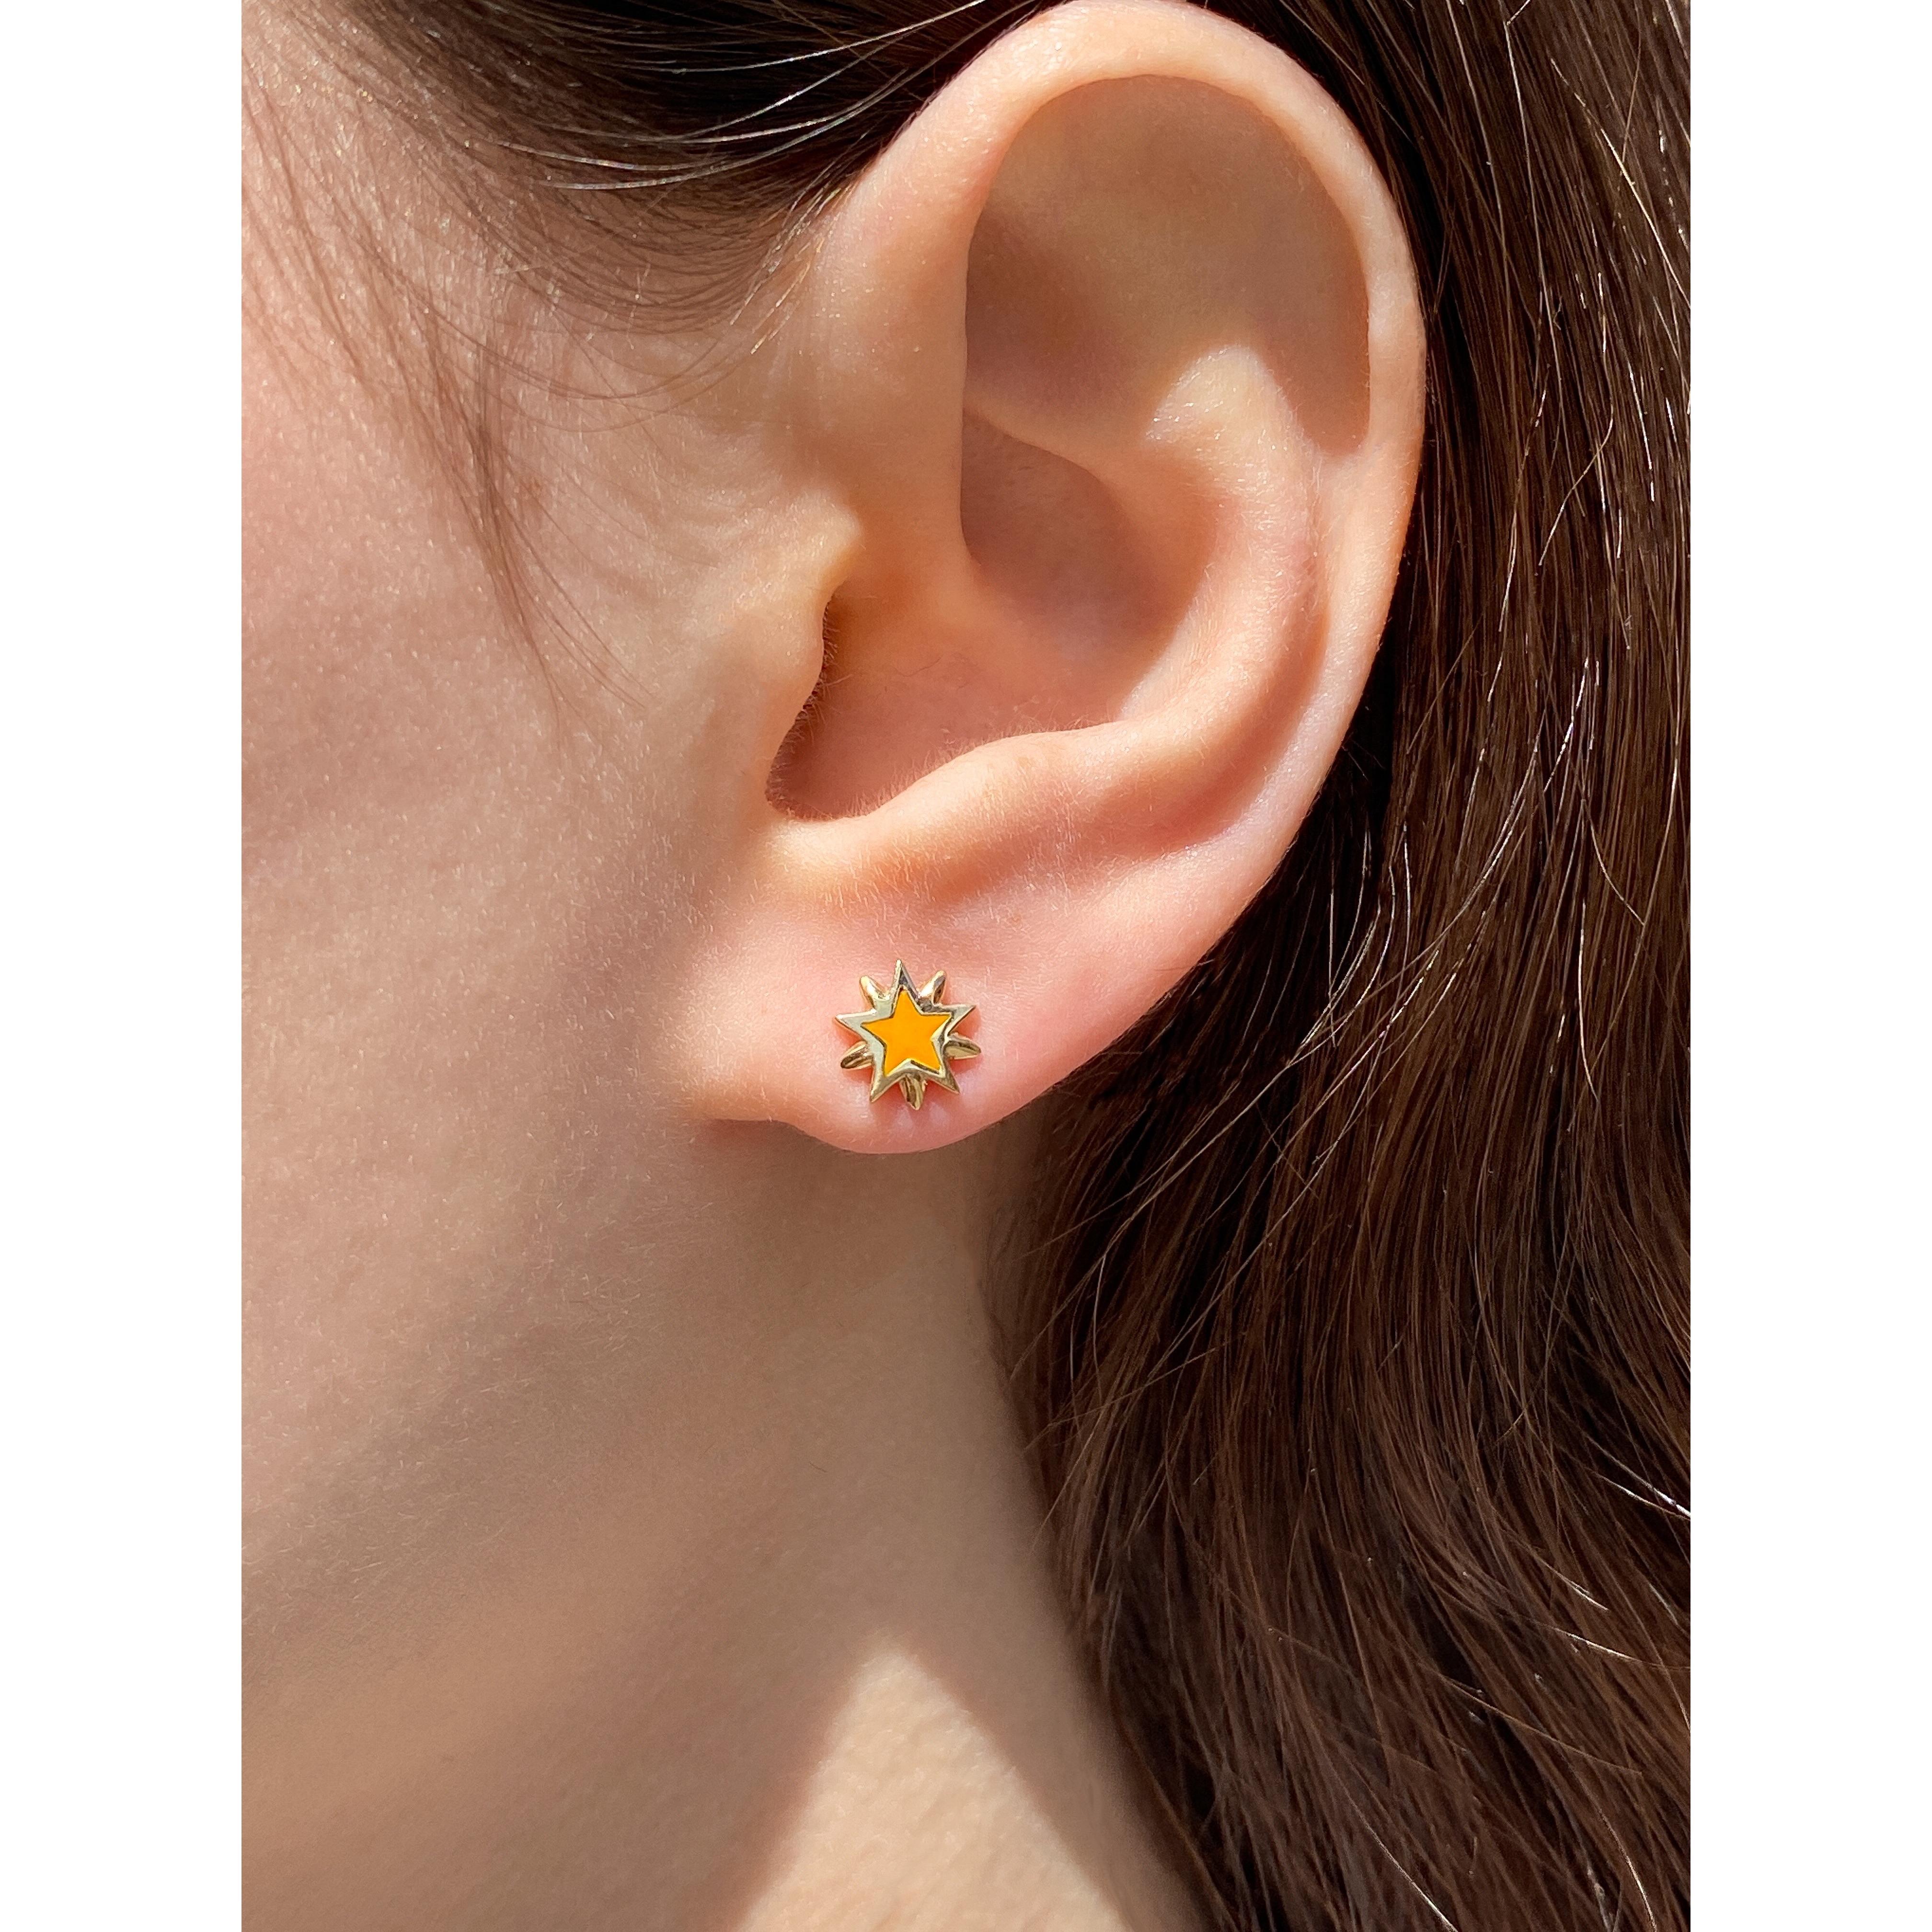 The Shiny Star, ear studs are crafted in 18K yellow gold, hallmarked in Cyprus. The cute little star studs come in a highly polished finish and are available in a choice of orange or blue enamel. Whether you wear them alone or layered, they are sure